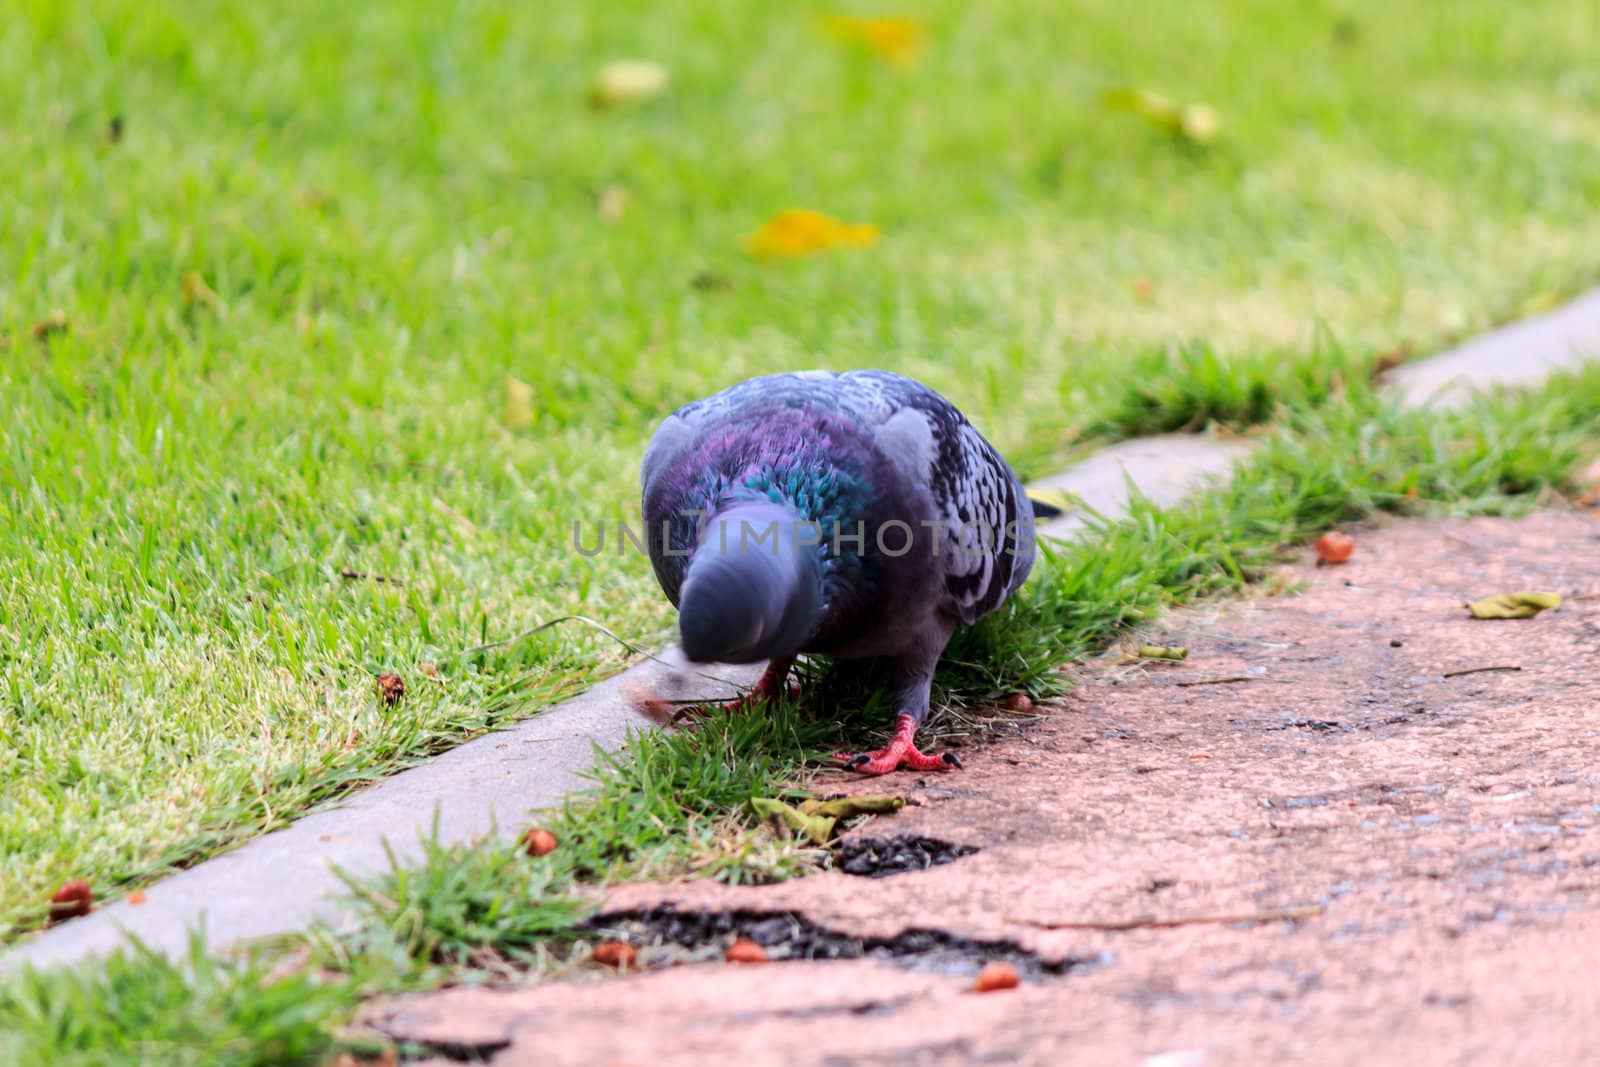 Feral or urban pigeon standing on the pathway in a public park.